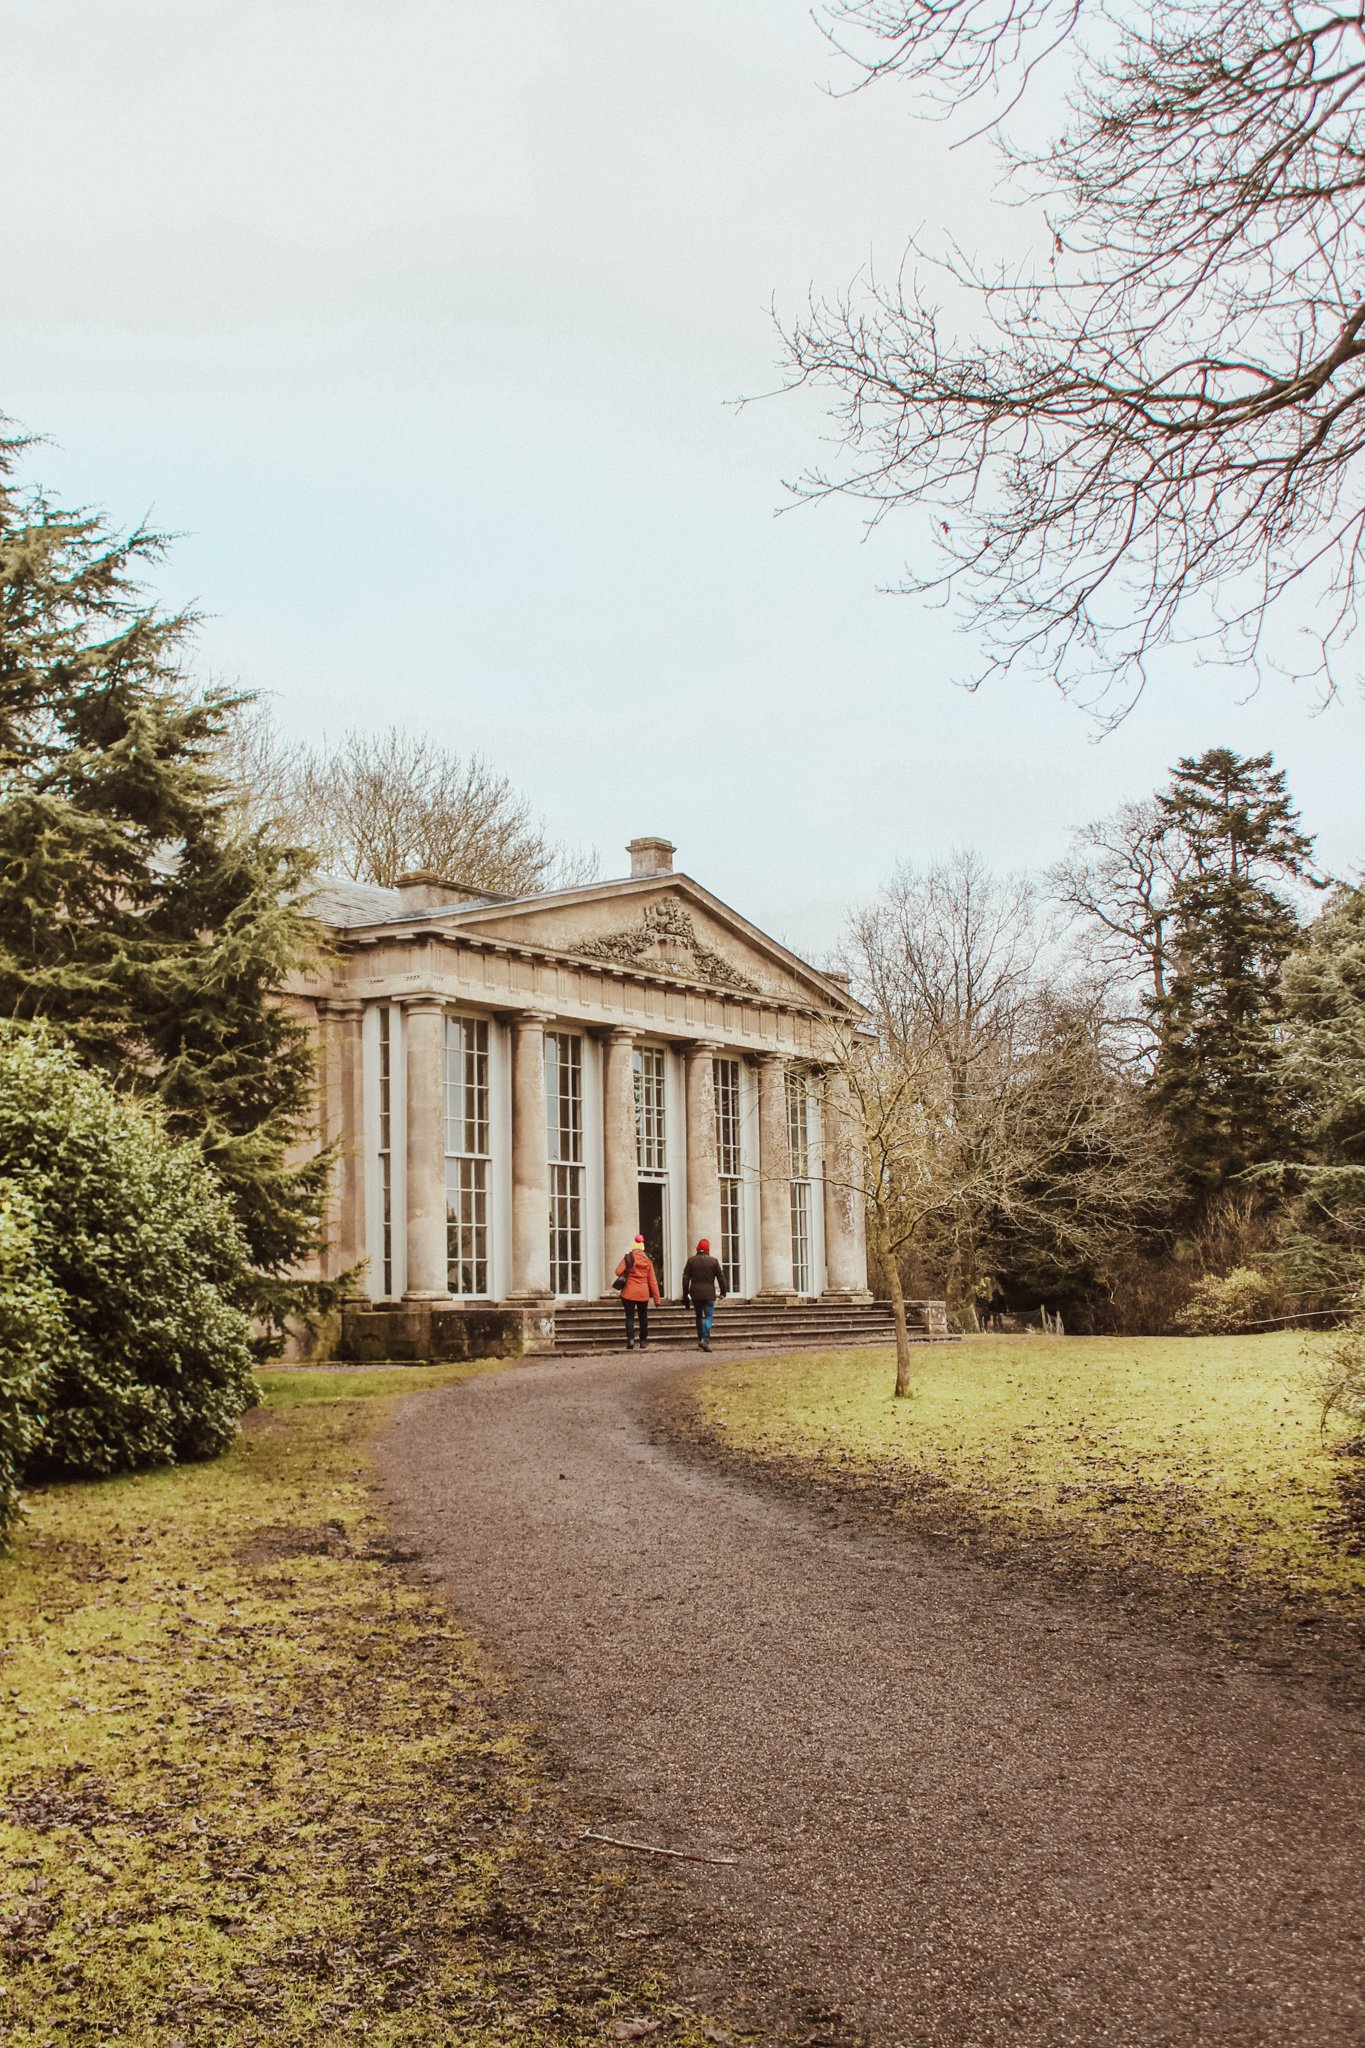 Visiting the National Trust's Croome, Worcestershire